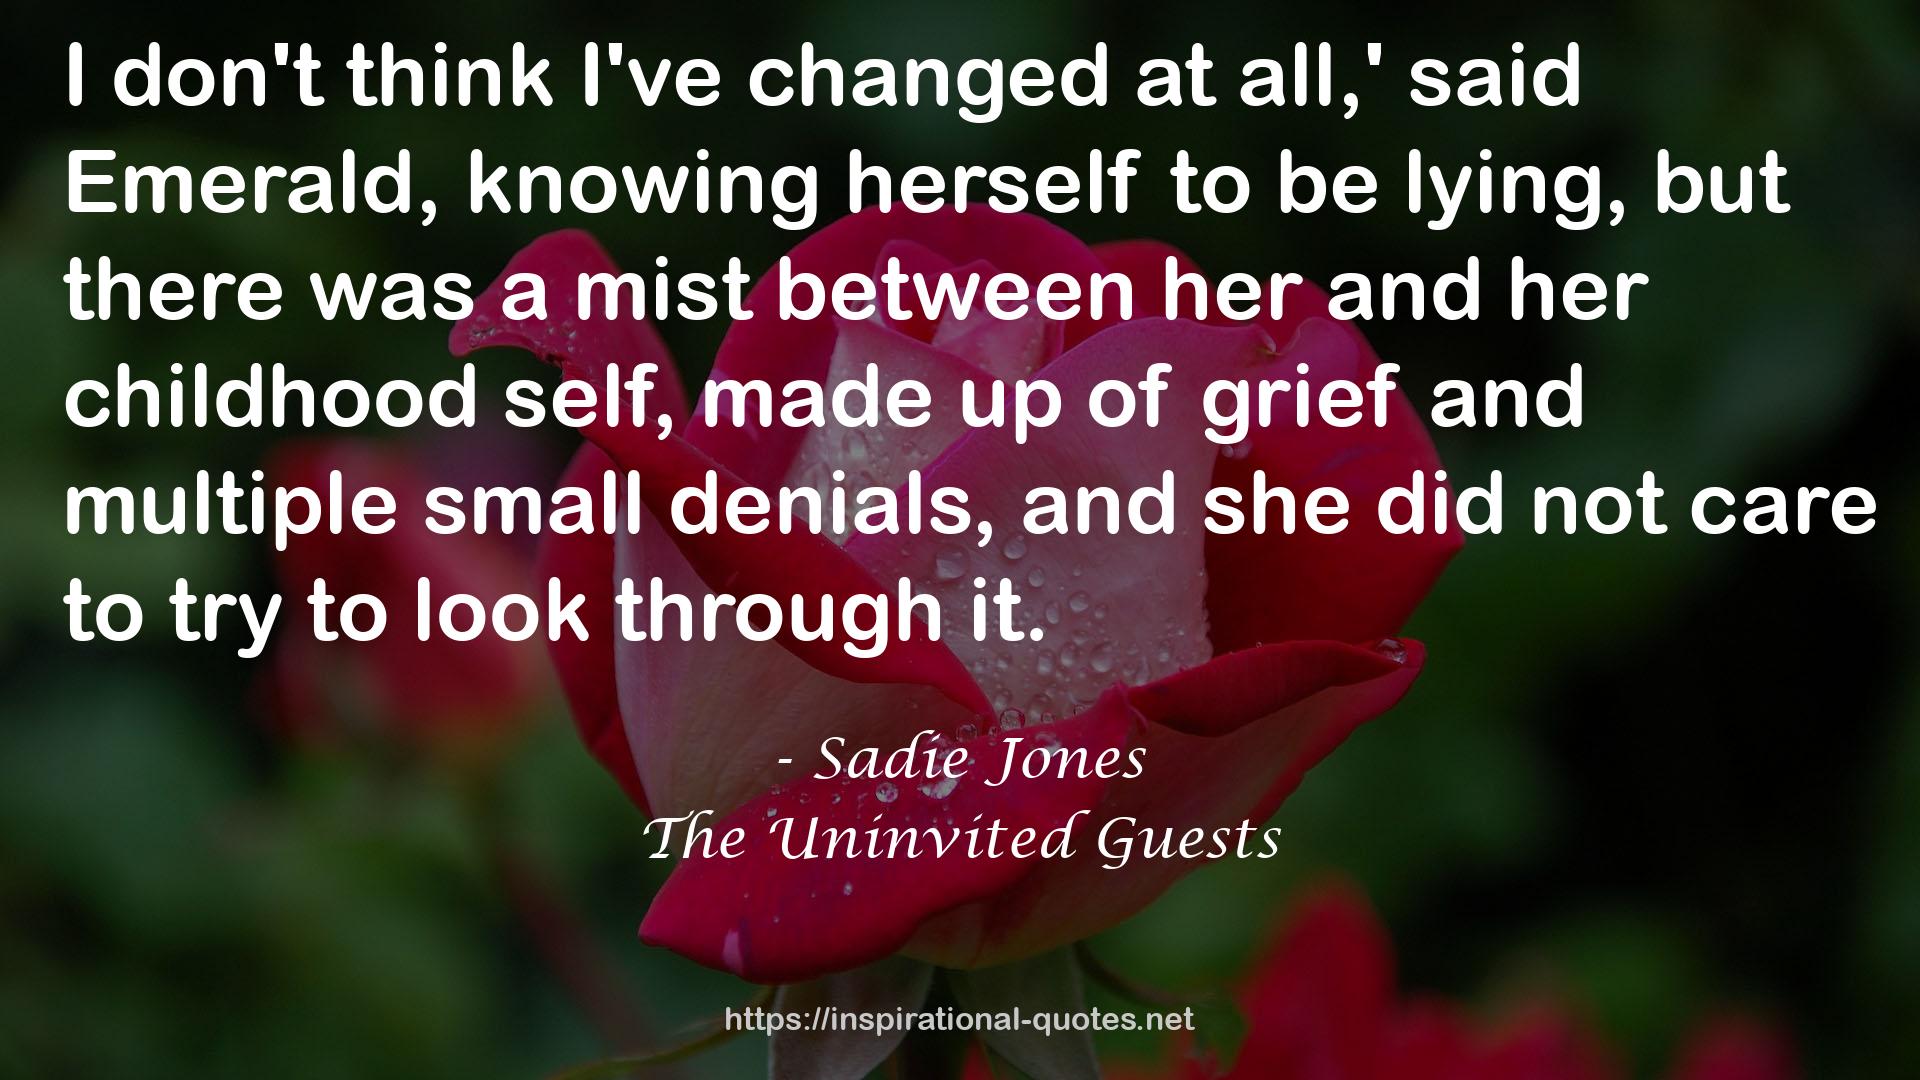 The Uninvited Guests QUOTES